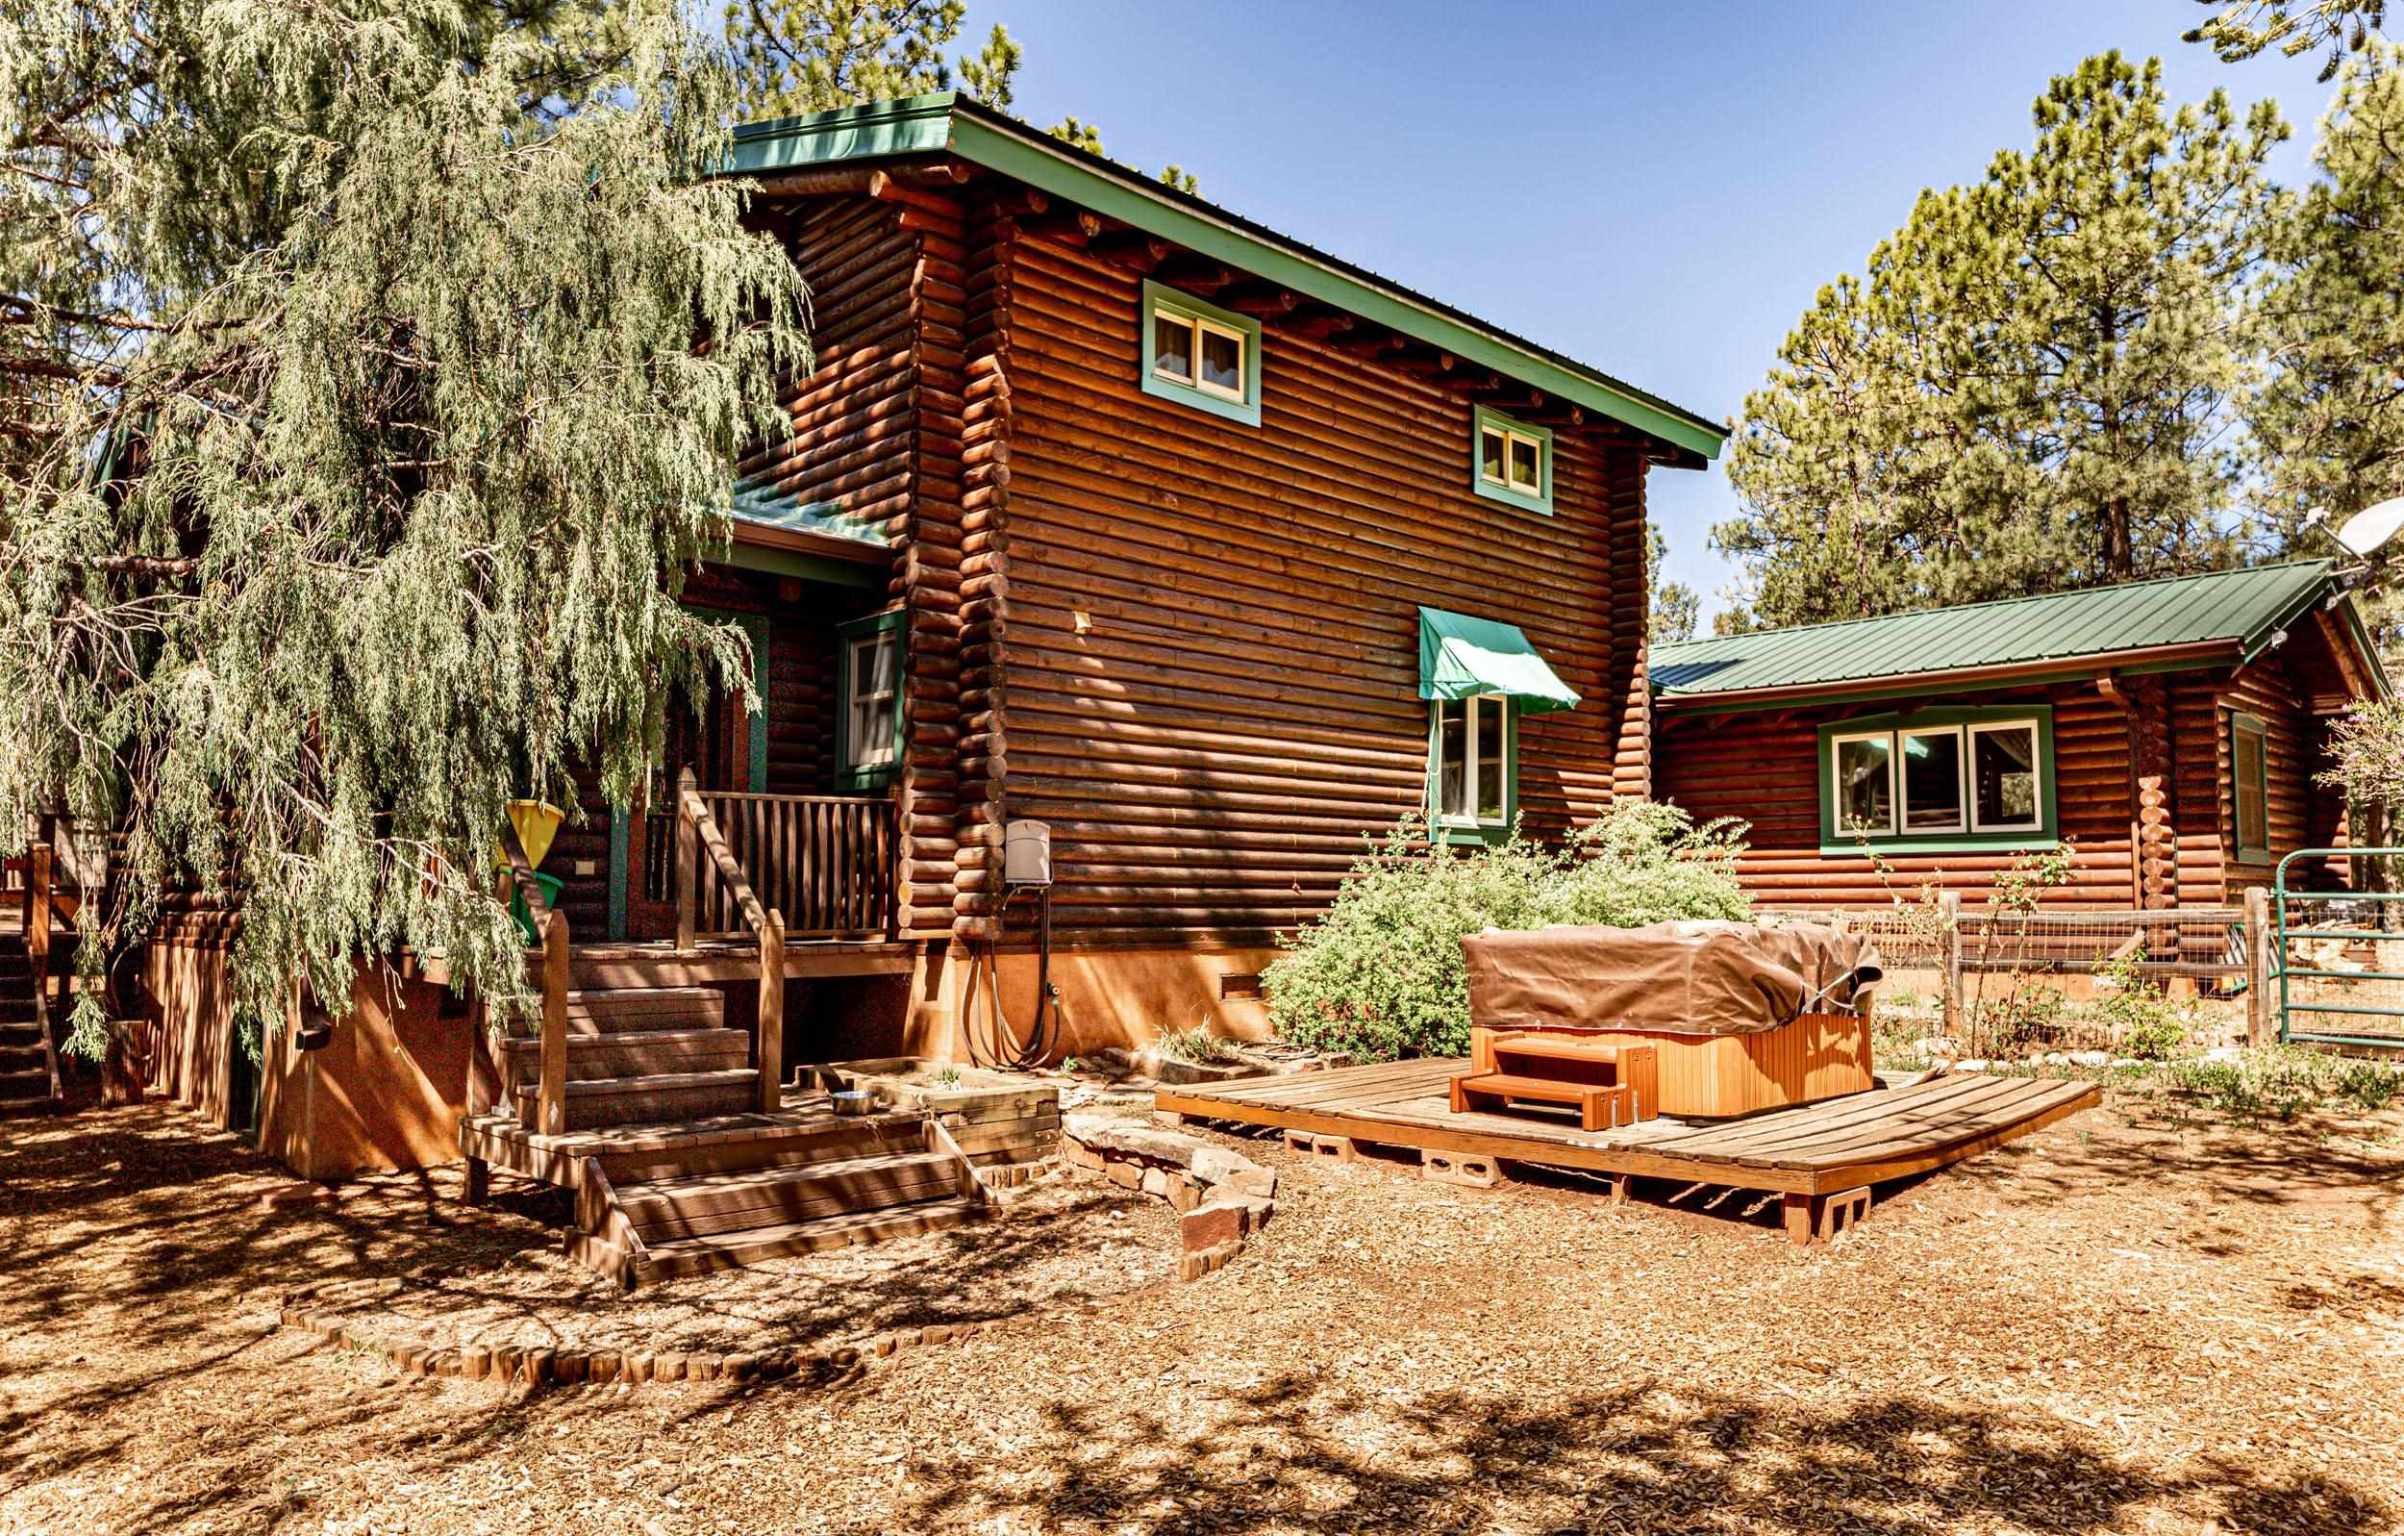 7 Log House Road, Glorieta, New Mexico 87535, 2 Bedrooms Bedrooms, ,2 BathroomsBathrooms,Residential,For Sale,7 Log House Road,202201998